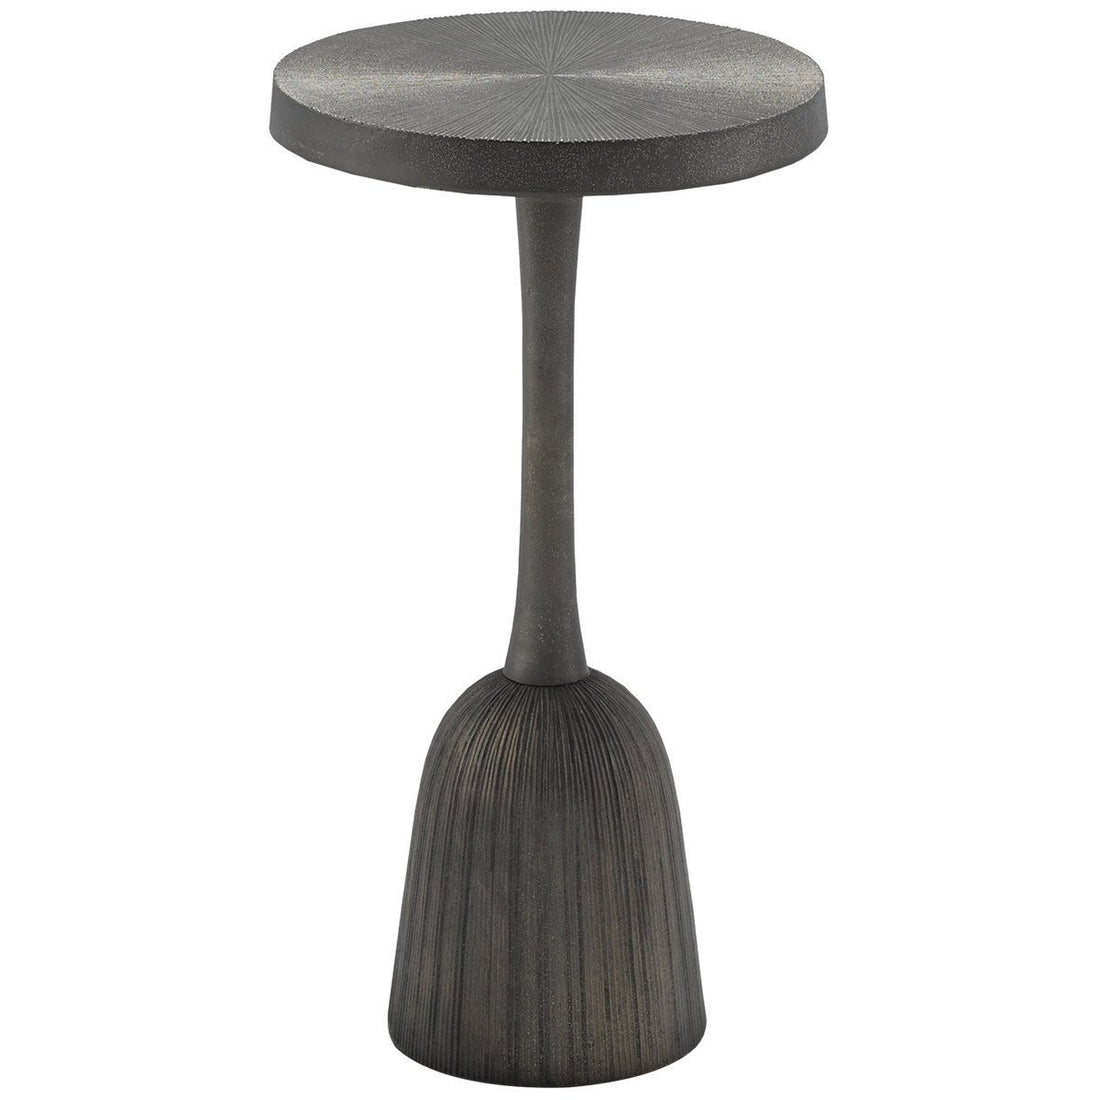 Currey and Company Tulee Accent Table